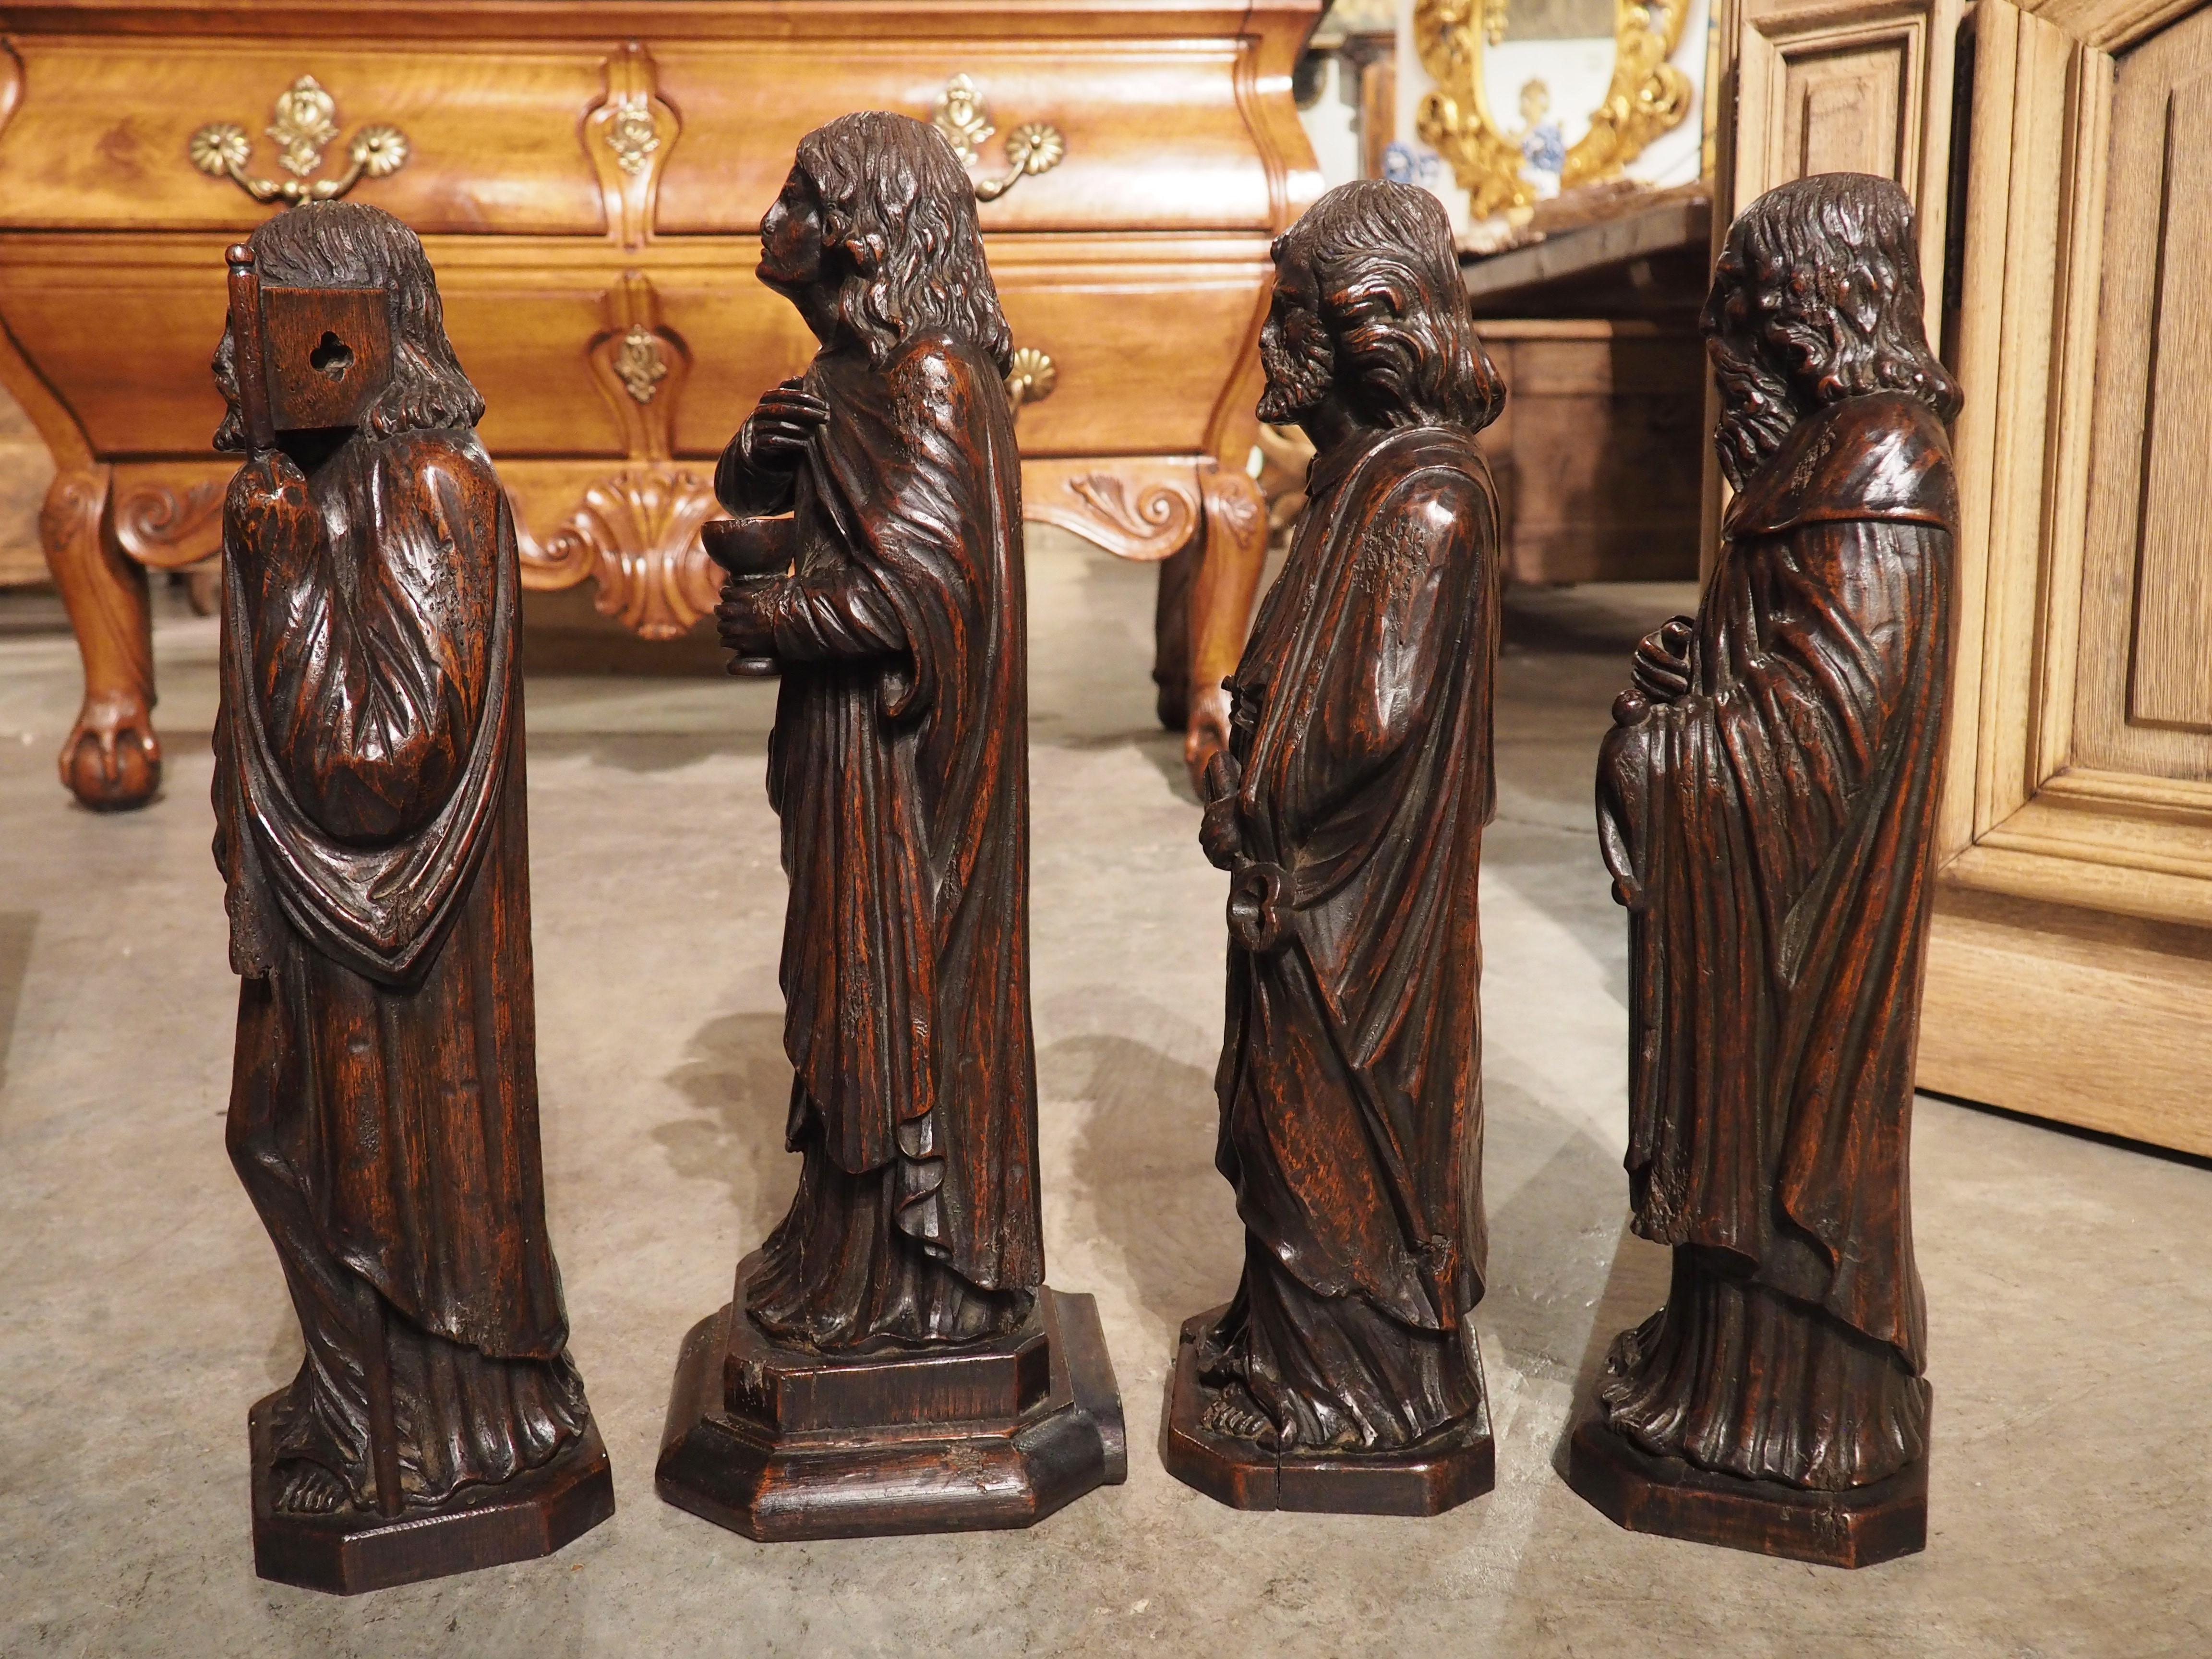 Circa 1800 Carved Oak Sculptures of the Apostles, James, John, Peter, and Paul For Sale 8